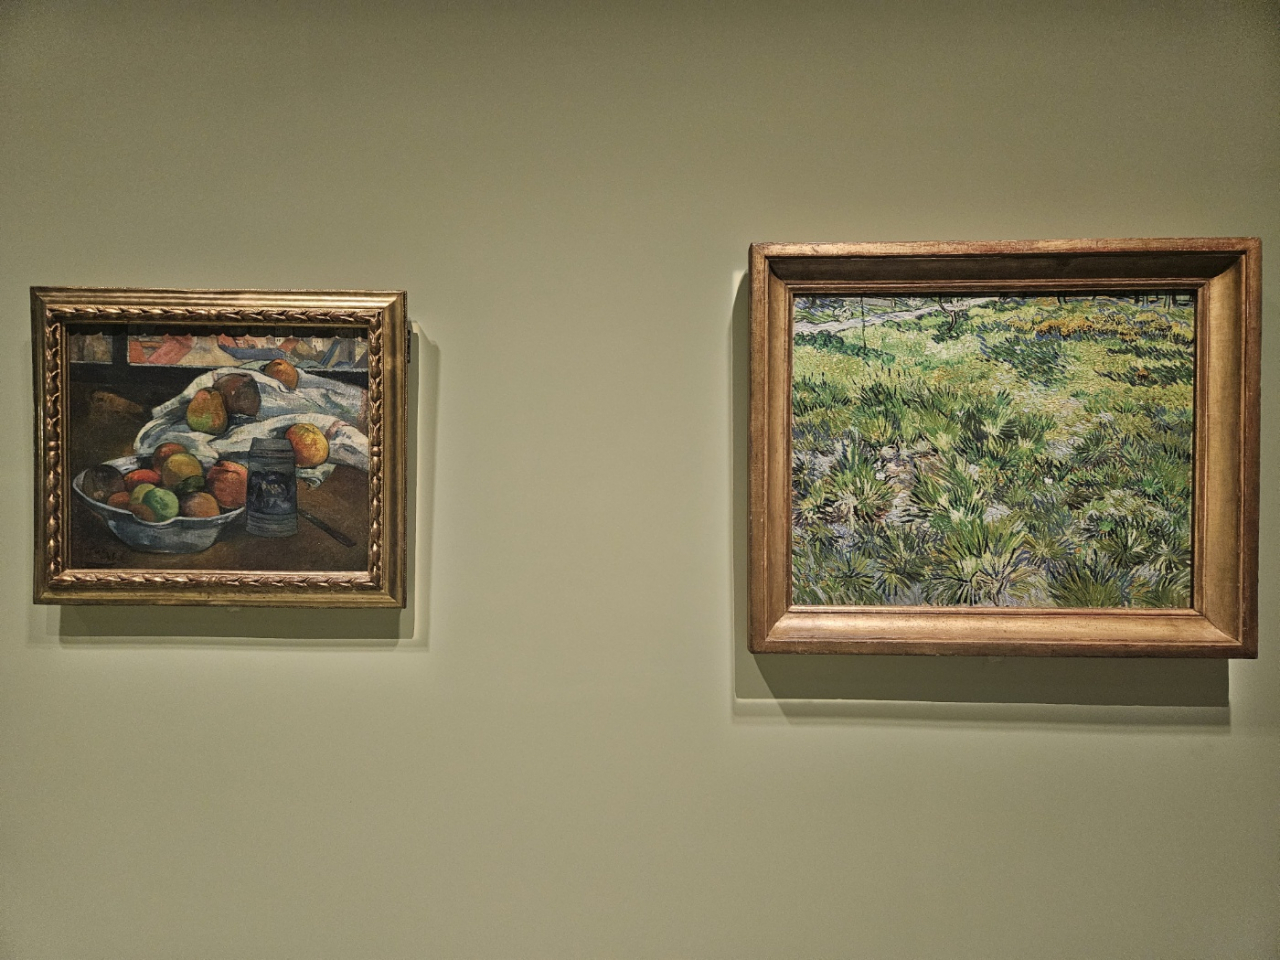 “Bowl of Fruit and Tankard before a Window” by Paul Gauguin (left) and “Long Grass with Butterflies” by Vincent Van Gogh are on display at the National Museum of Korea as part of the exhibition 